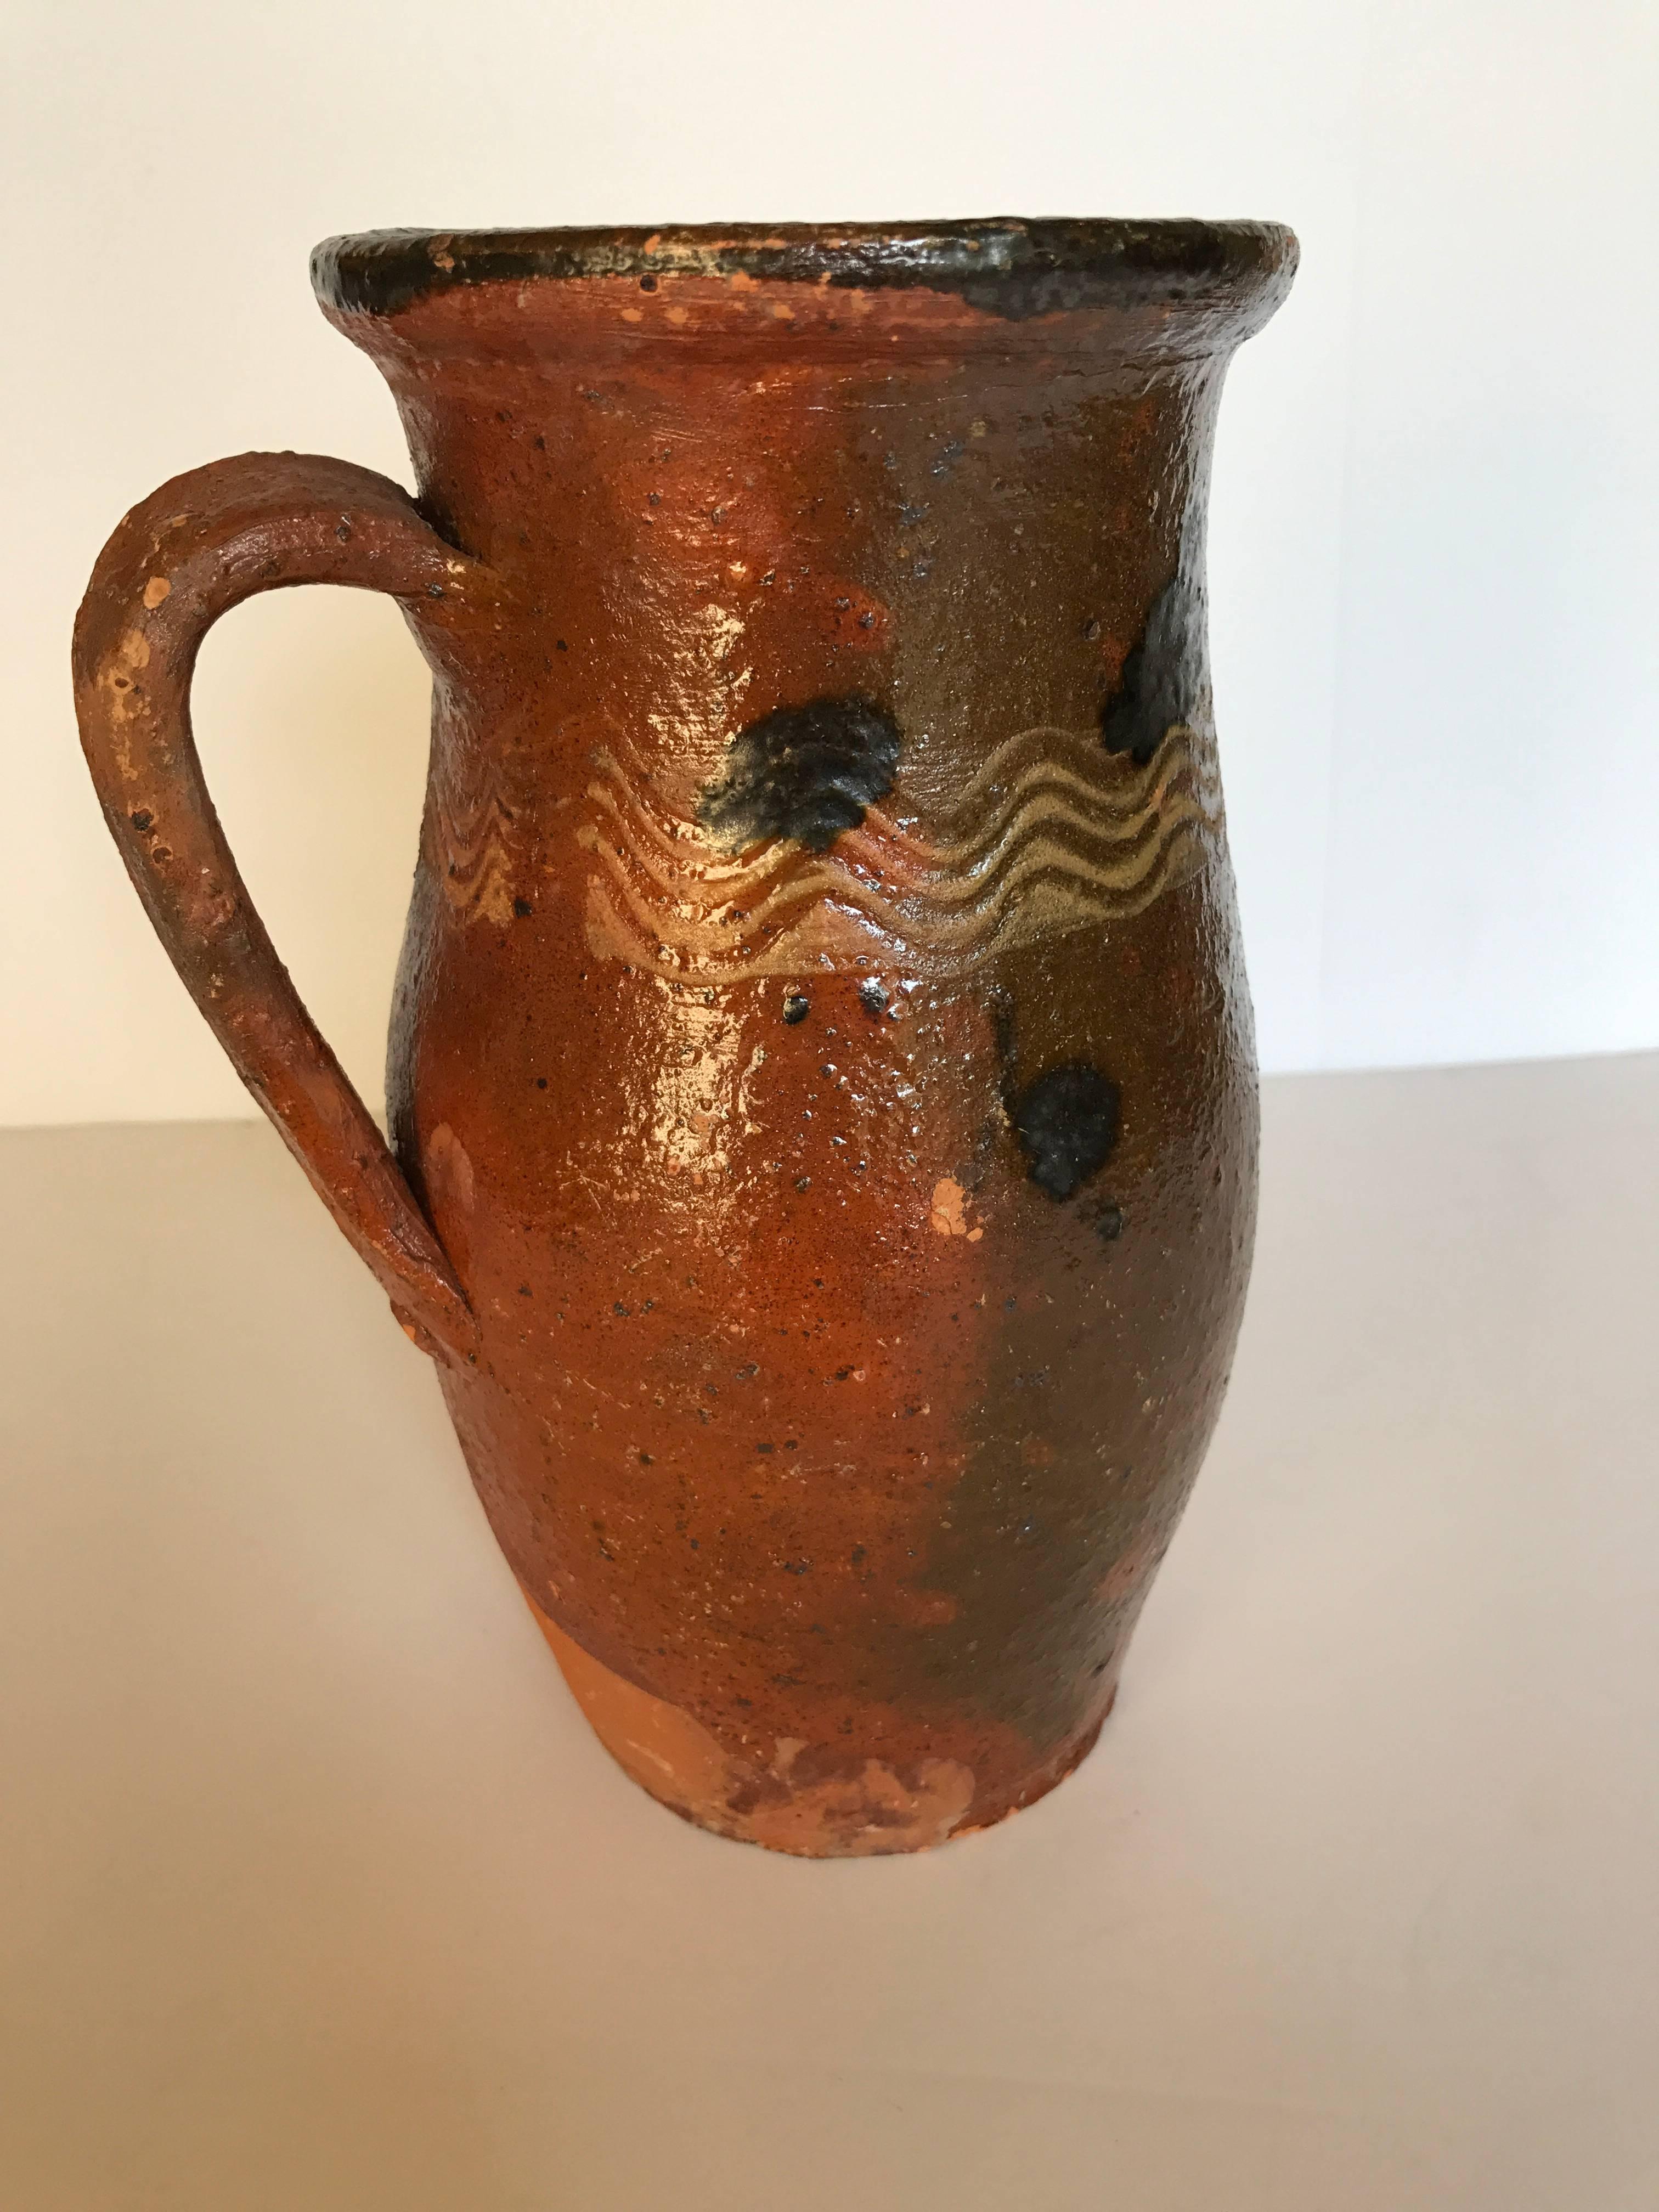 Vintage redware pitcher made in Transylvania, Romania, early 20th century. Pitcher still has a nice glaze with traditional Folk Art designs and minimal flaking. Great decorative piece.